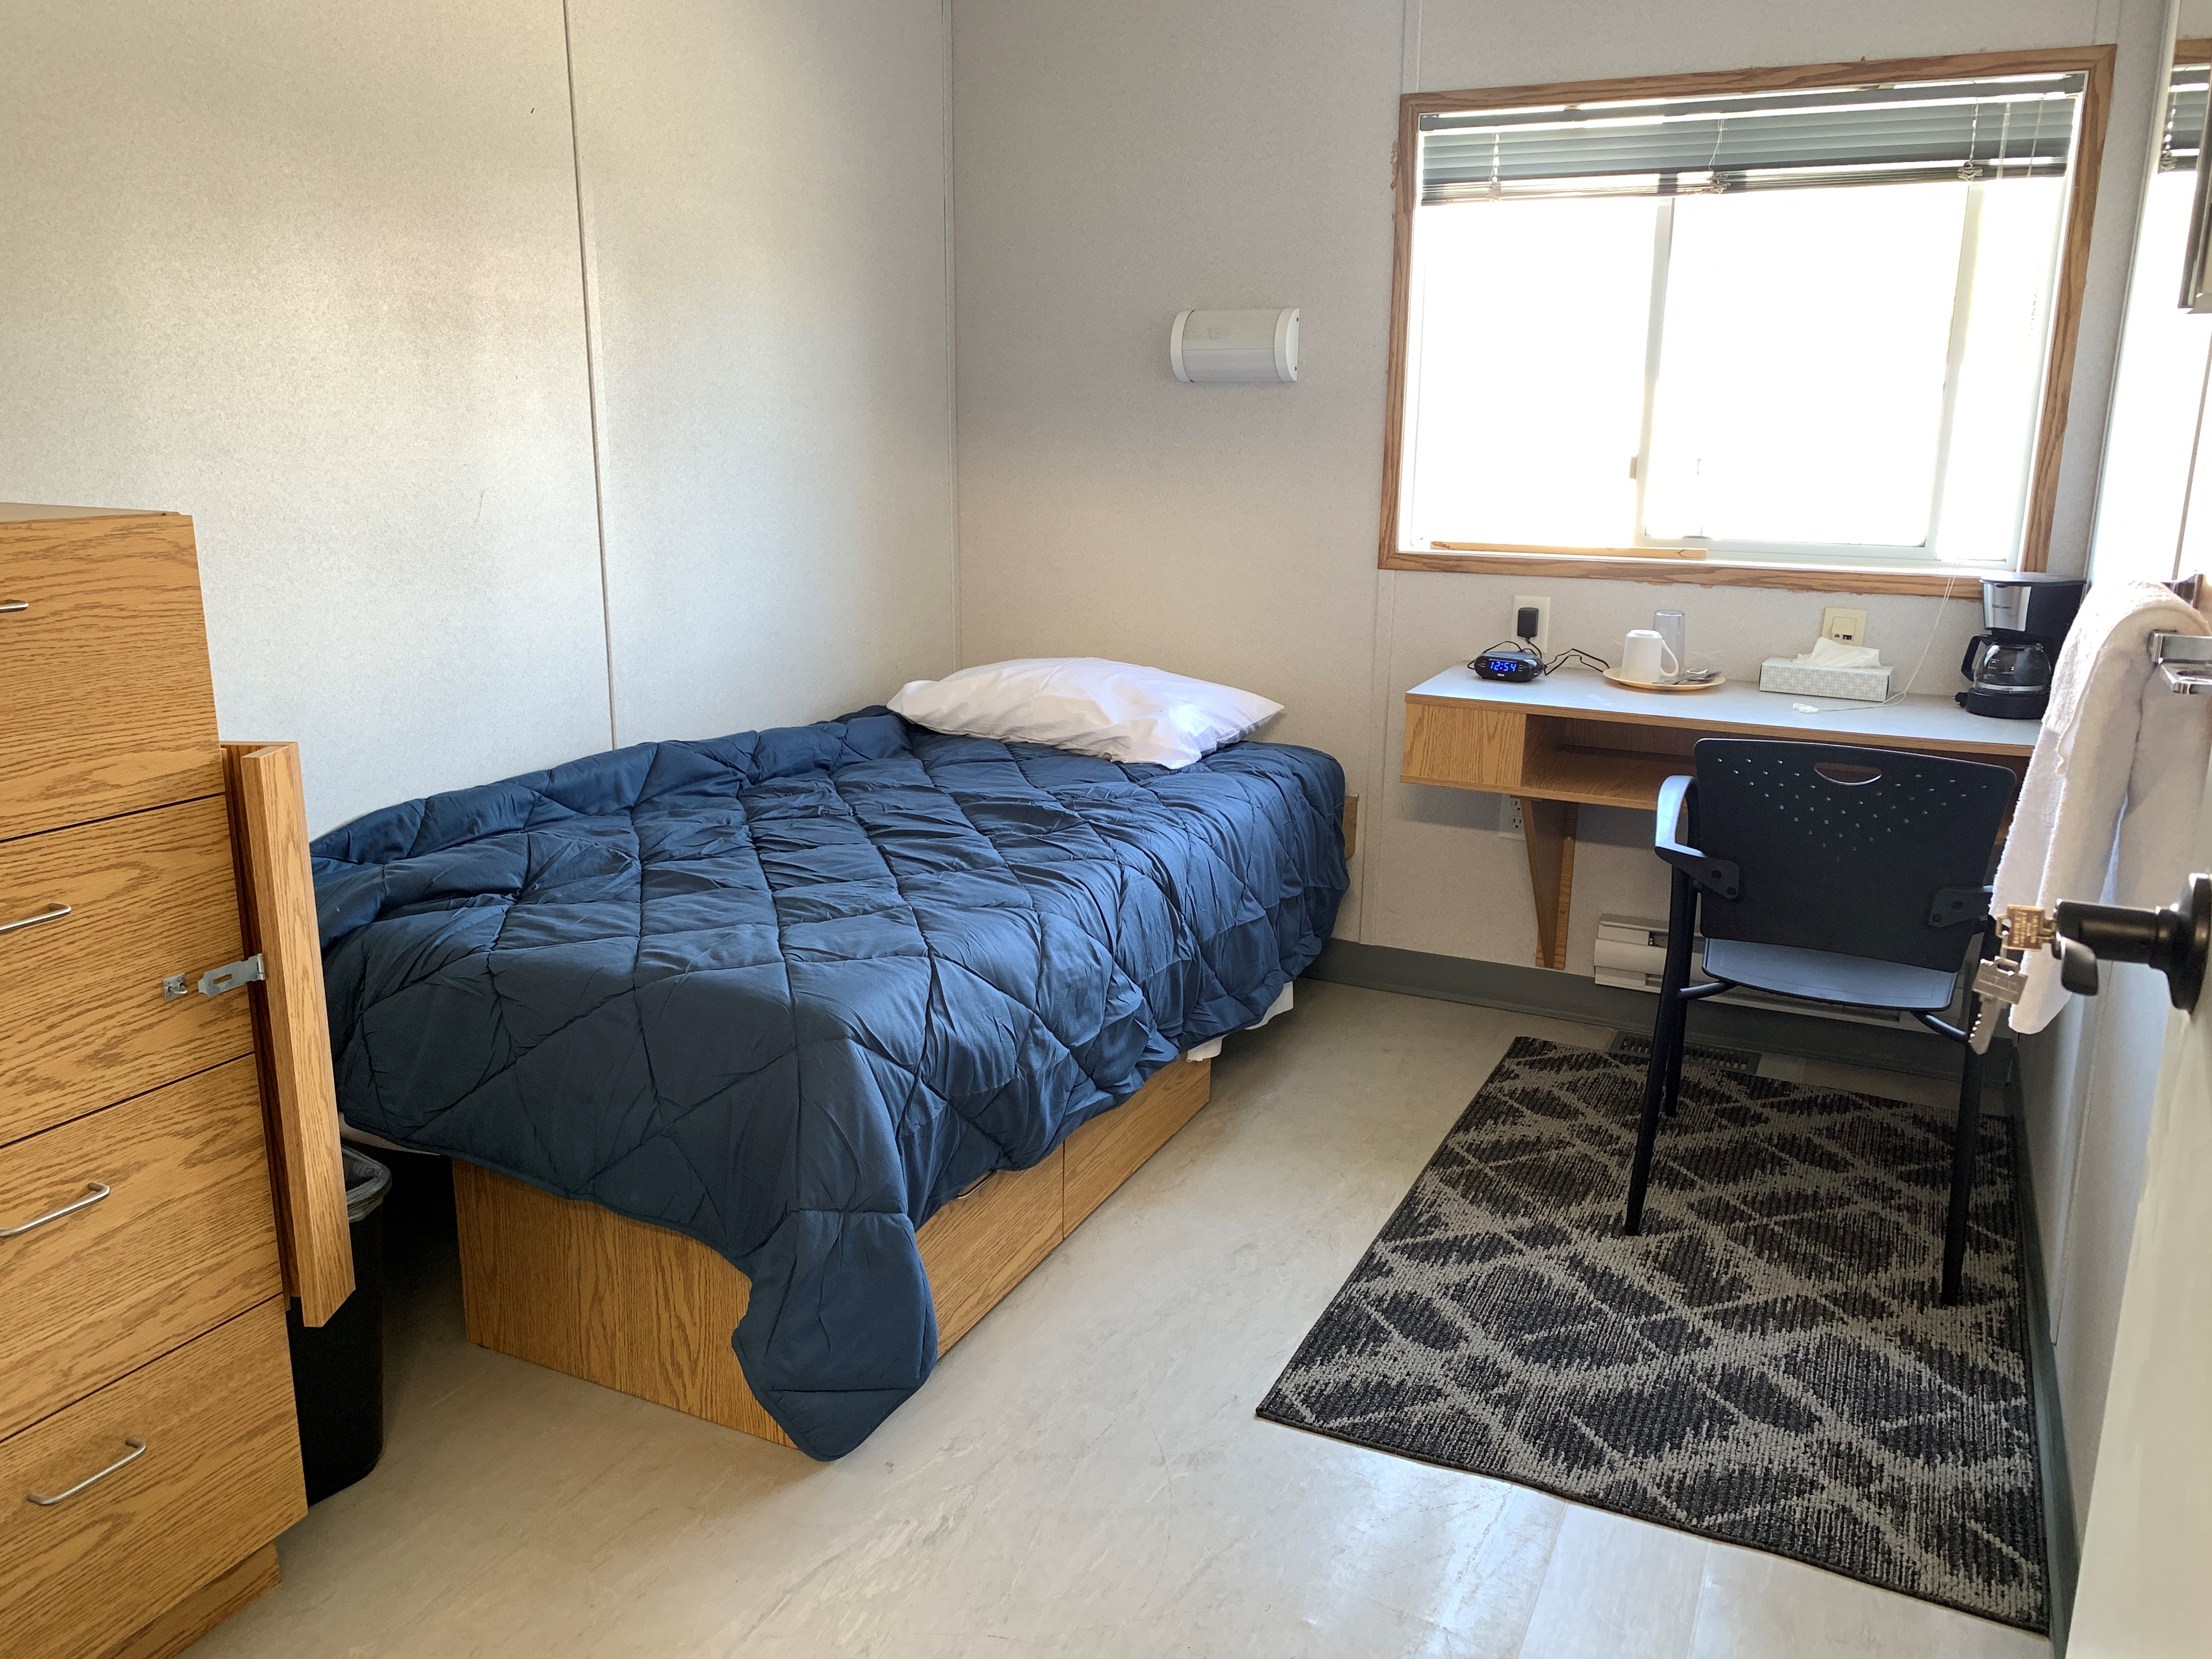 More transitional housing now complete for people experiencing homelessness in Kelowna